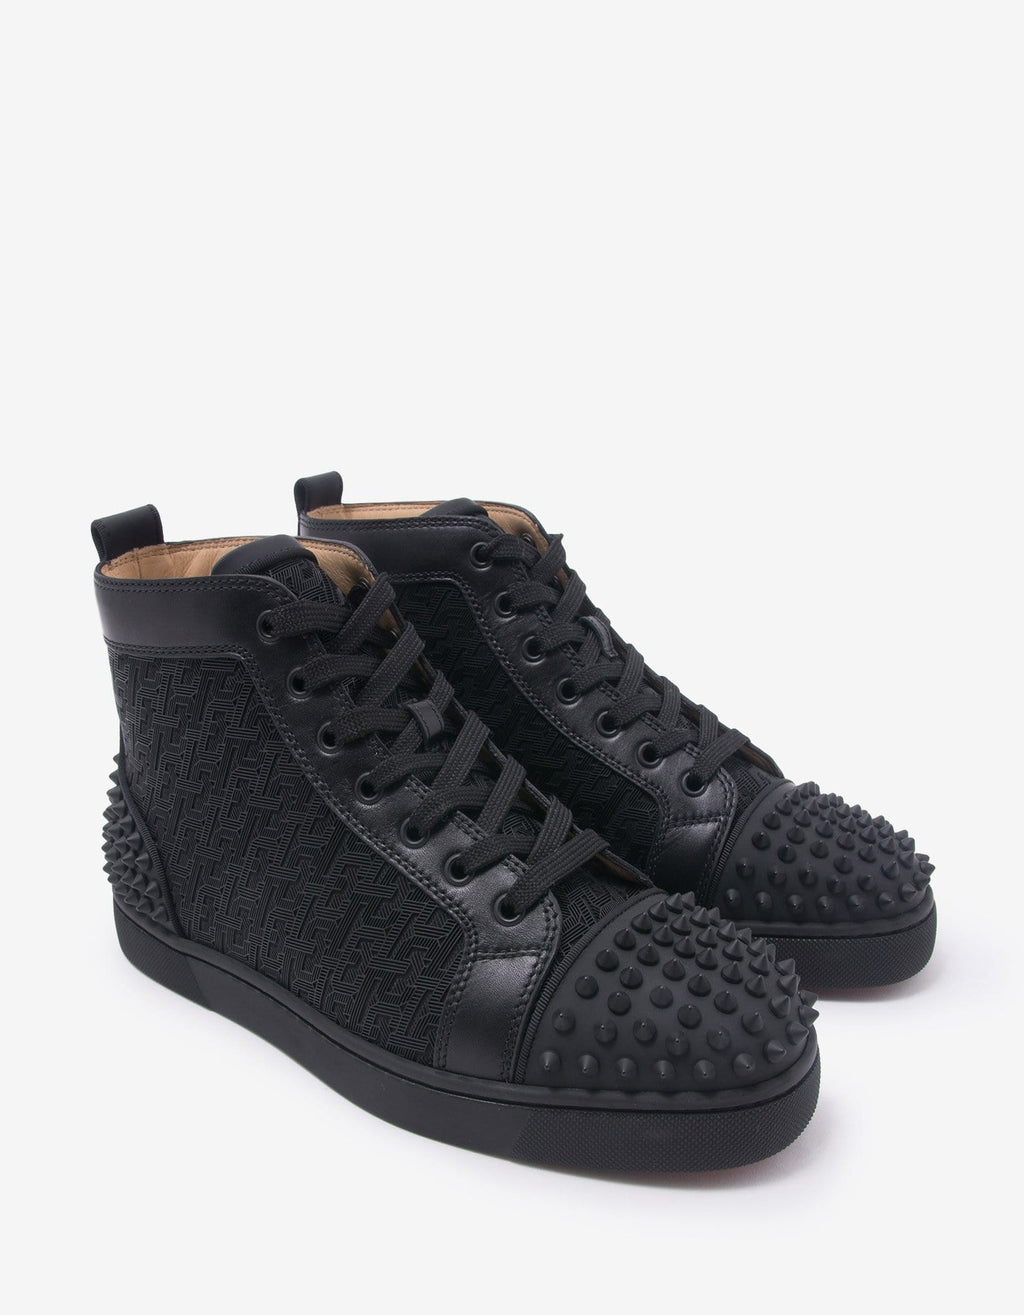 Christian Louboutin Christian Louboutin Lou Spikes 2 Black CL Logo High Top Trainers